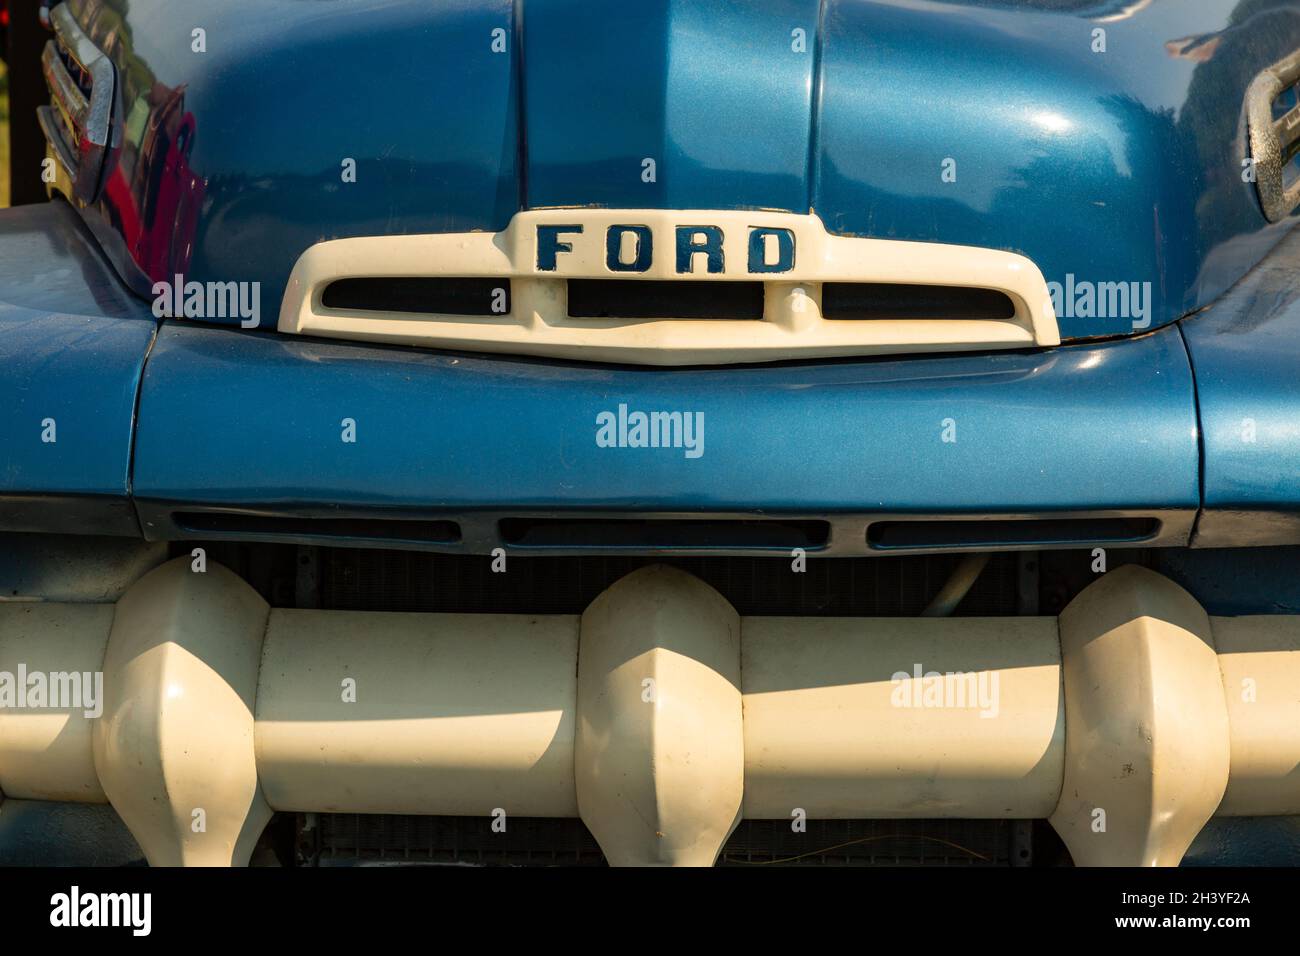 The iconic grill of an antique blue 1951 Ford truck. Stock Photo